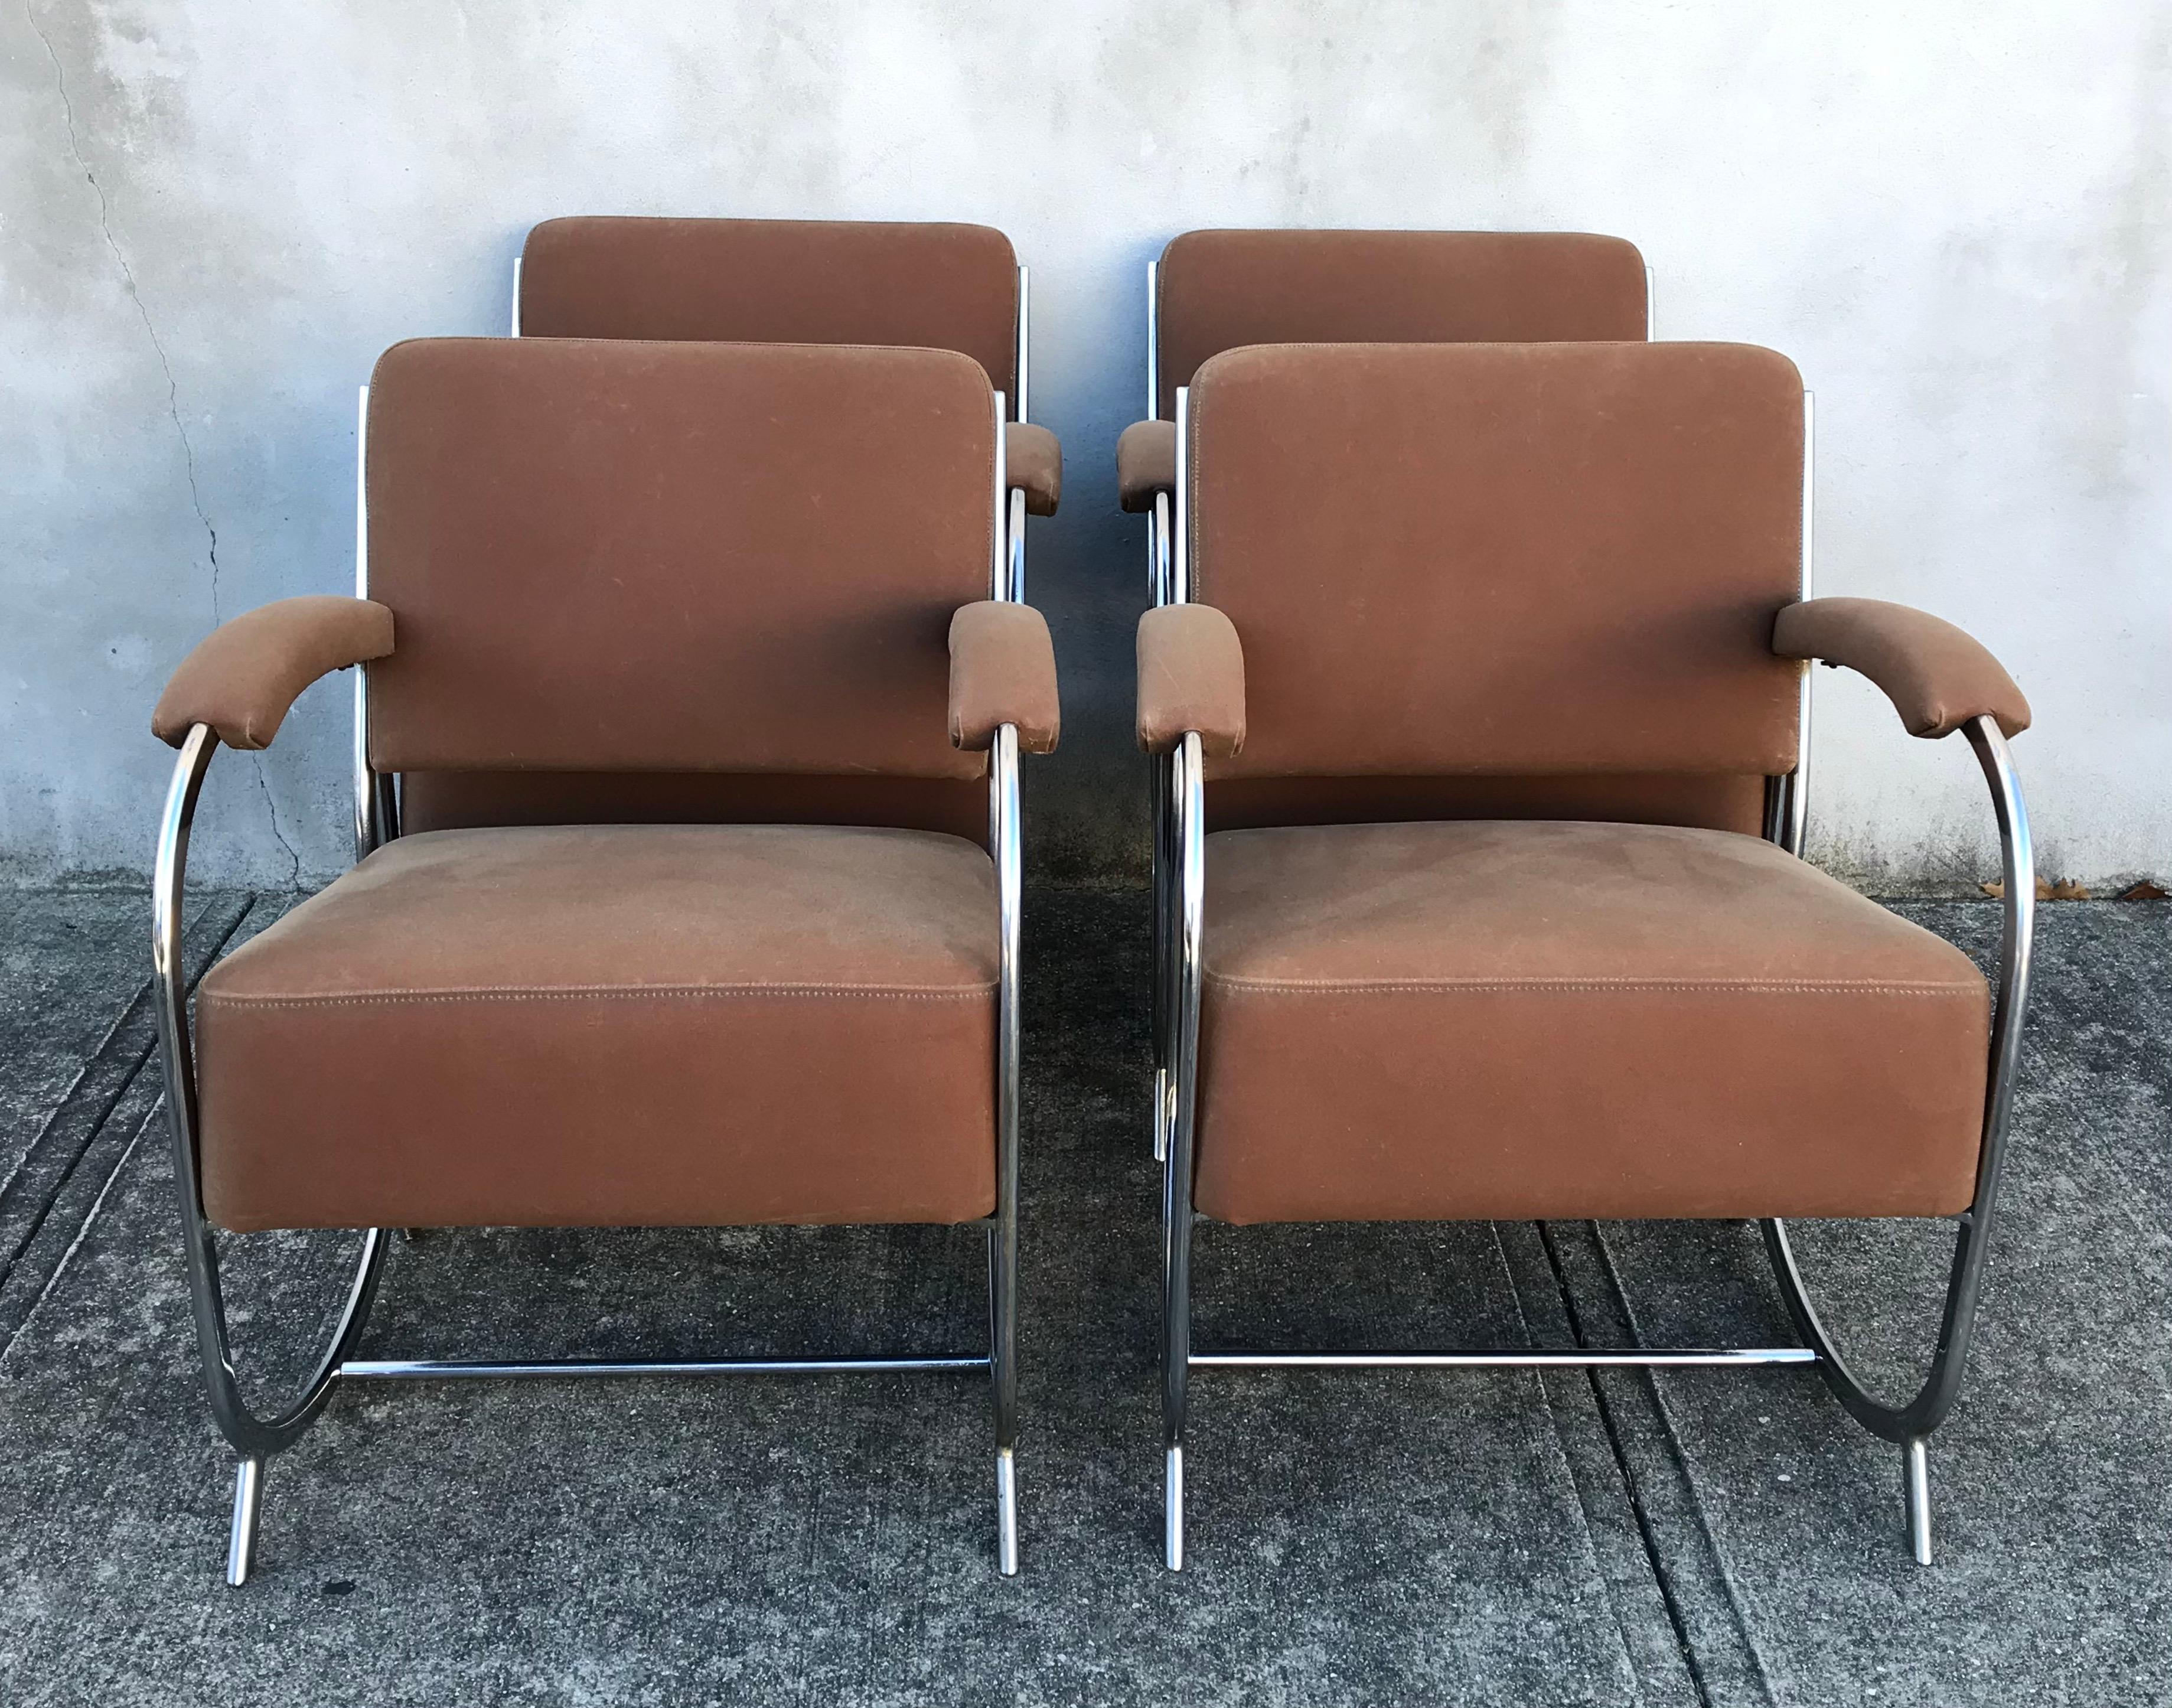 Fantastic and very rare set of 4 1930s club chairs by Theo A. Kochs Chicago in the style of KEM Weber. Aged patina chromed frames, reupholstered in nutmeg colored waxed canvas. Please note that waxed canvas fabric will easily mark or craze, which is